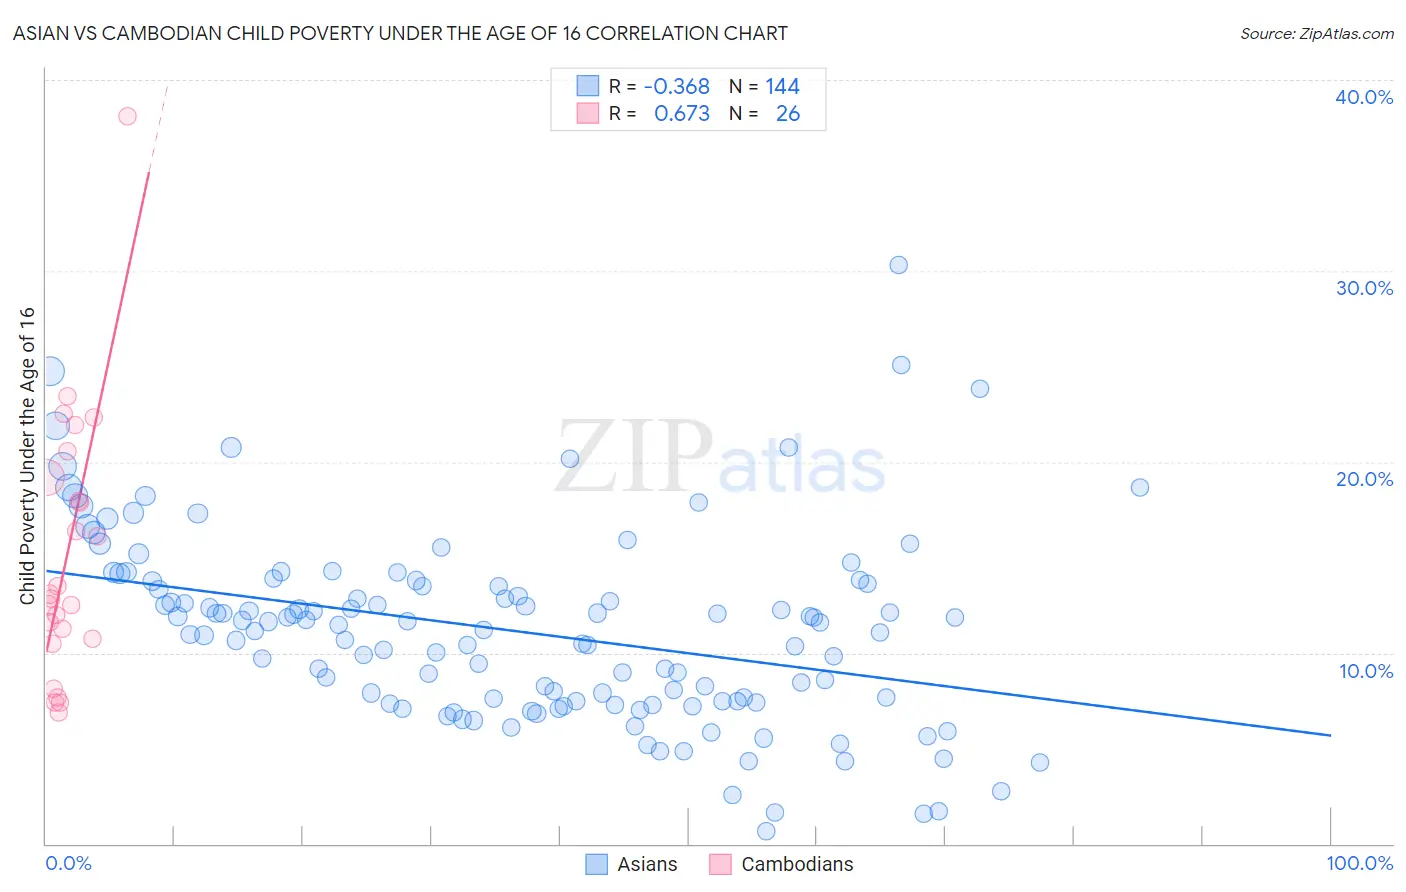 Asian vs Cambodian Child Poverty Under the Age of 16